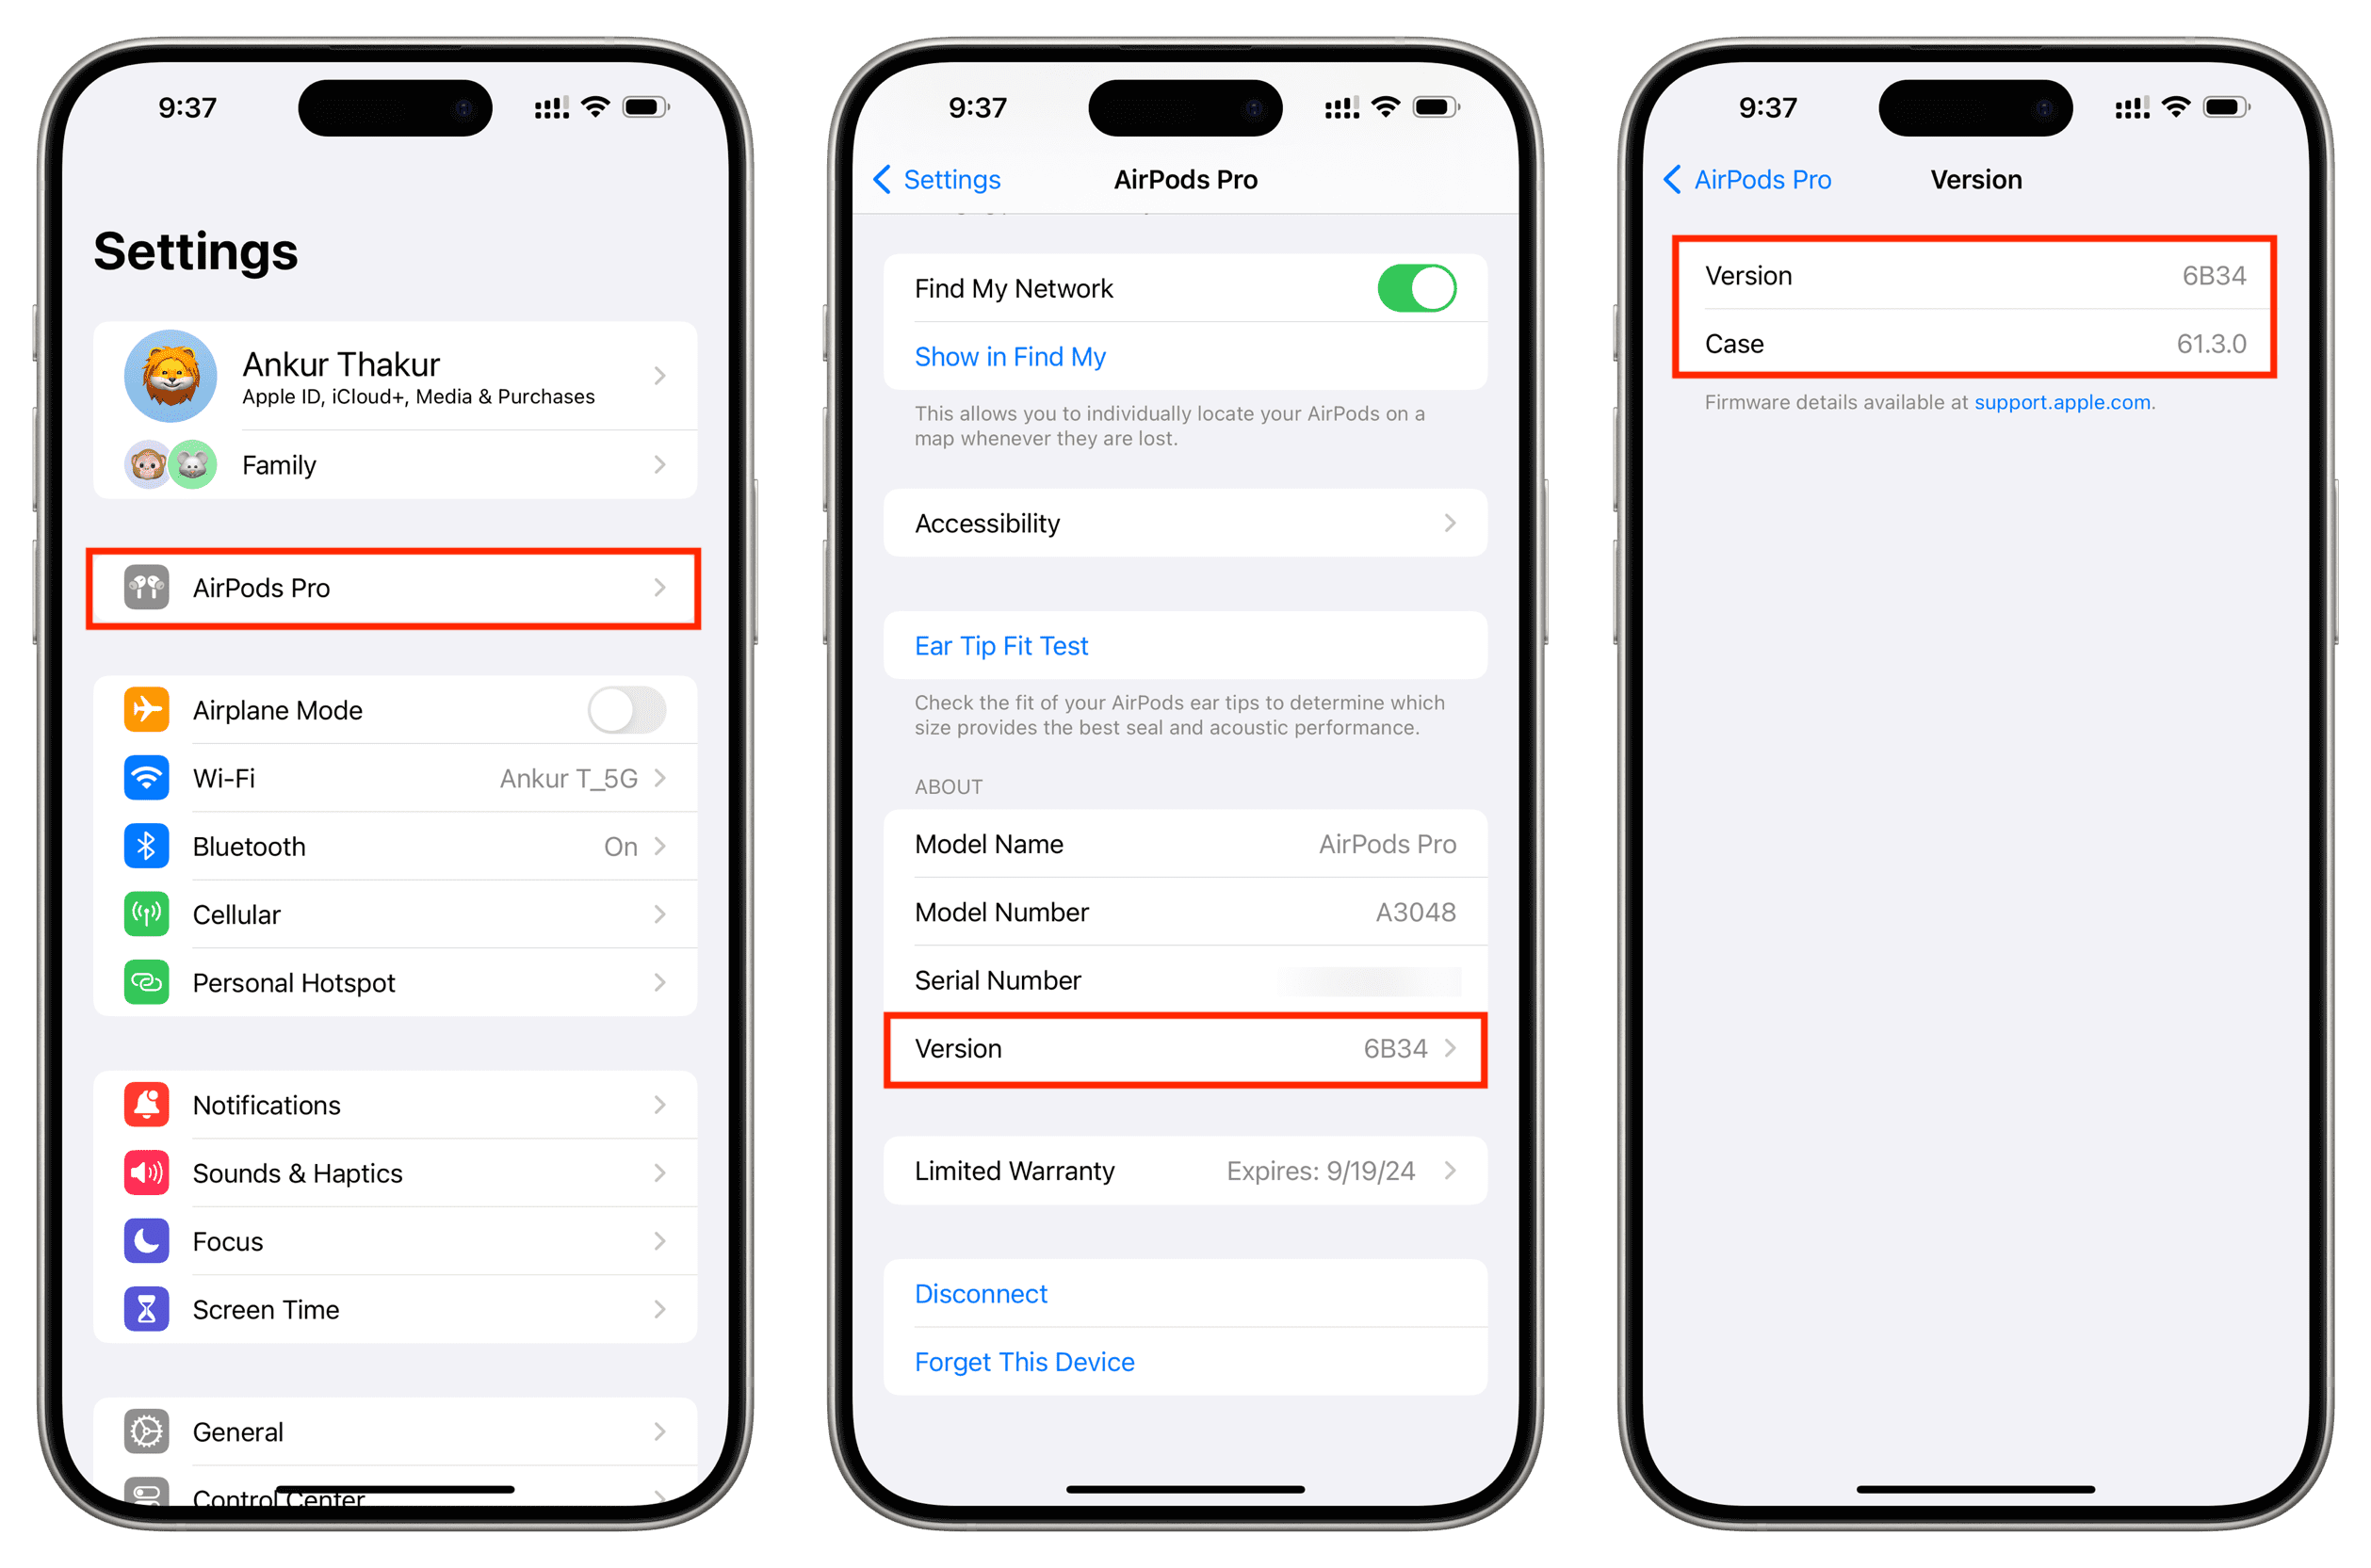 Tap AirPods name in Settings to see firmware version for AirPods and its case